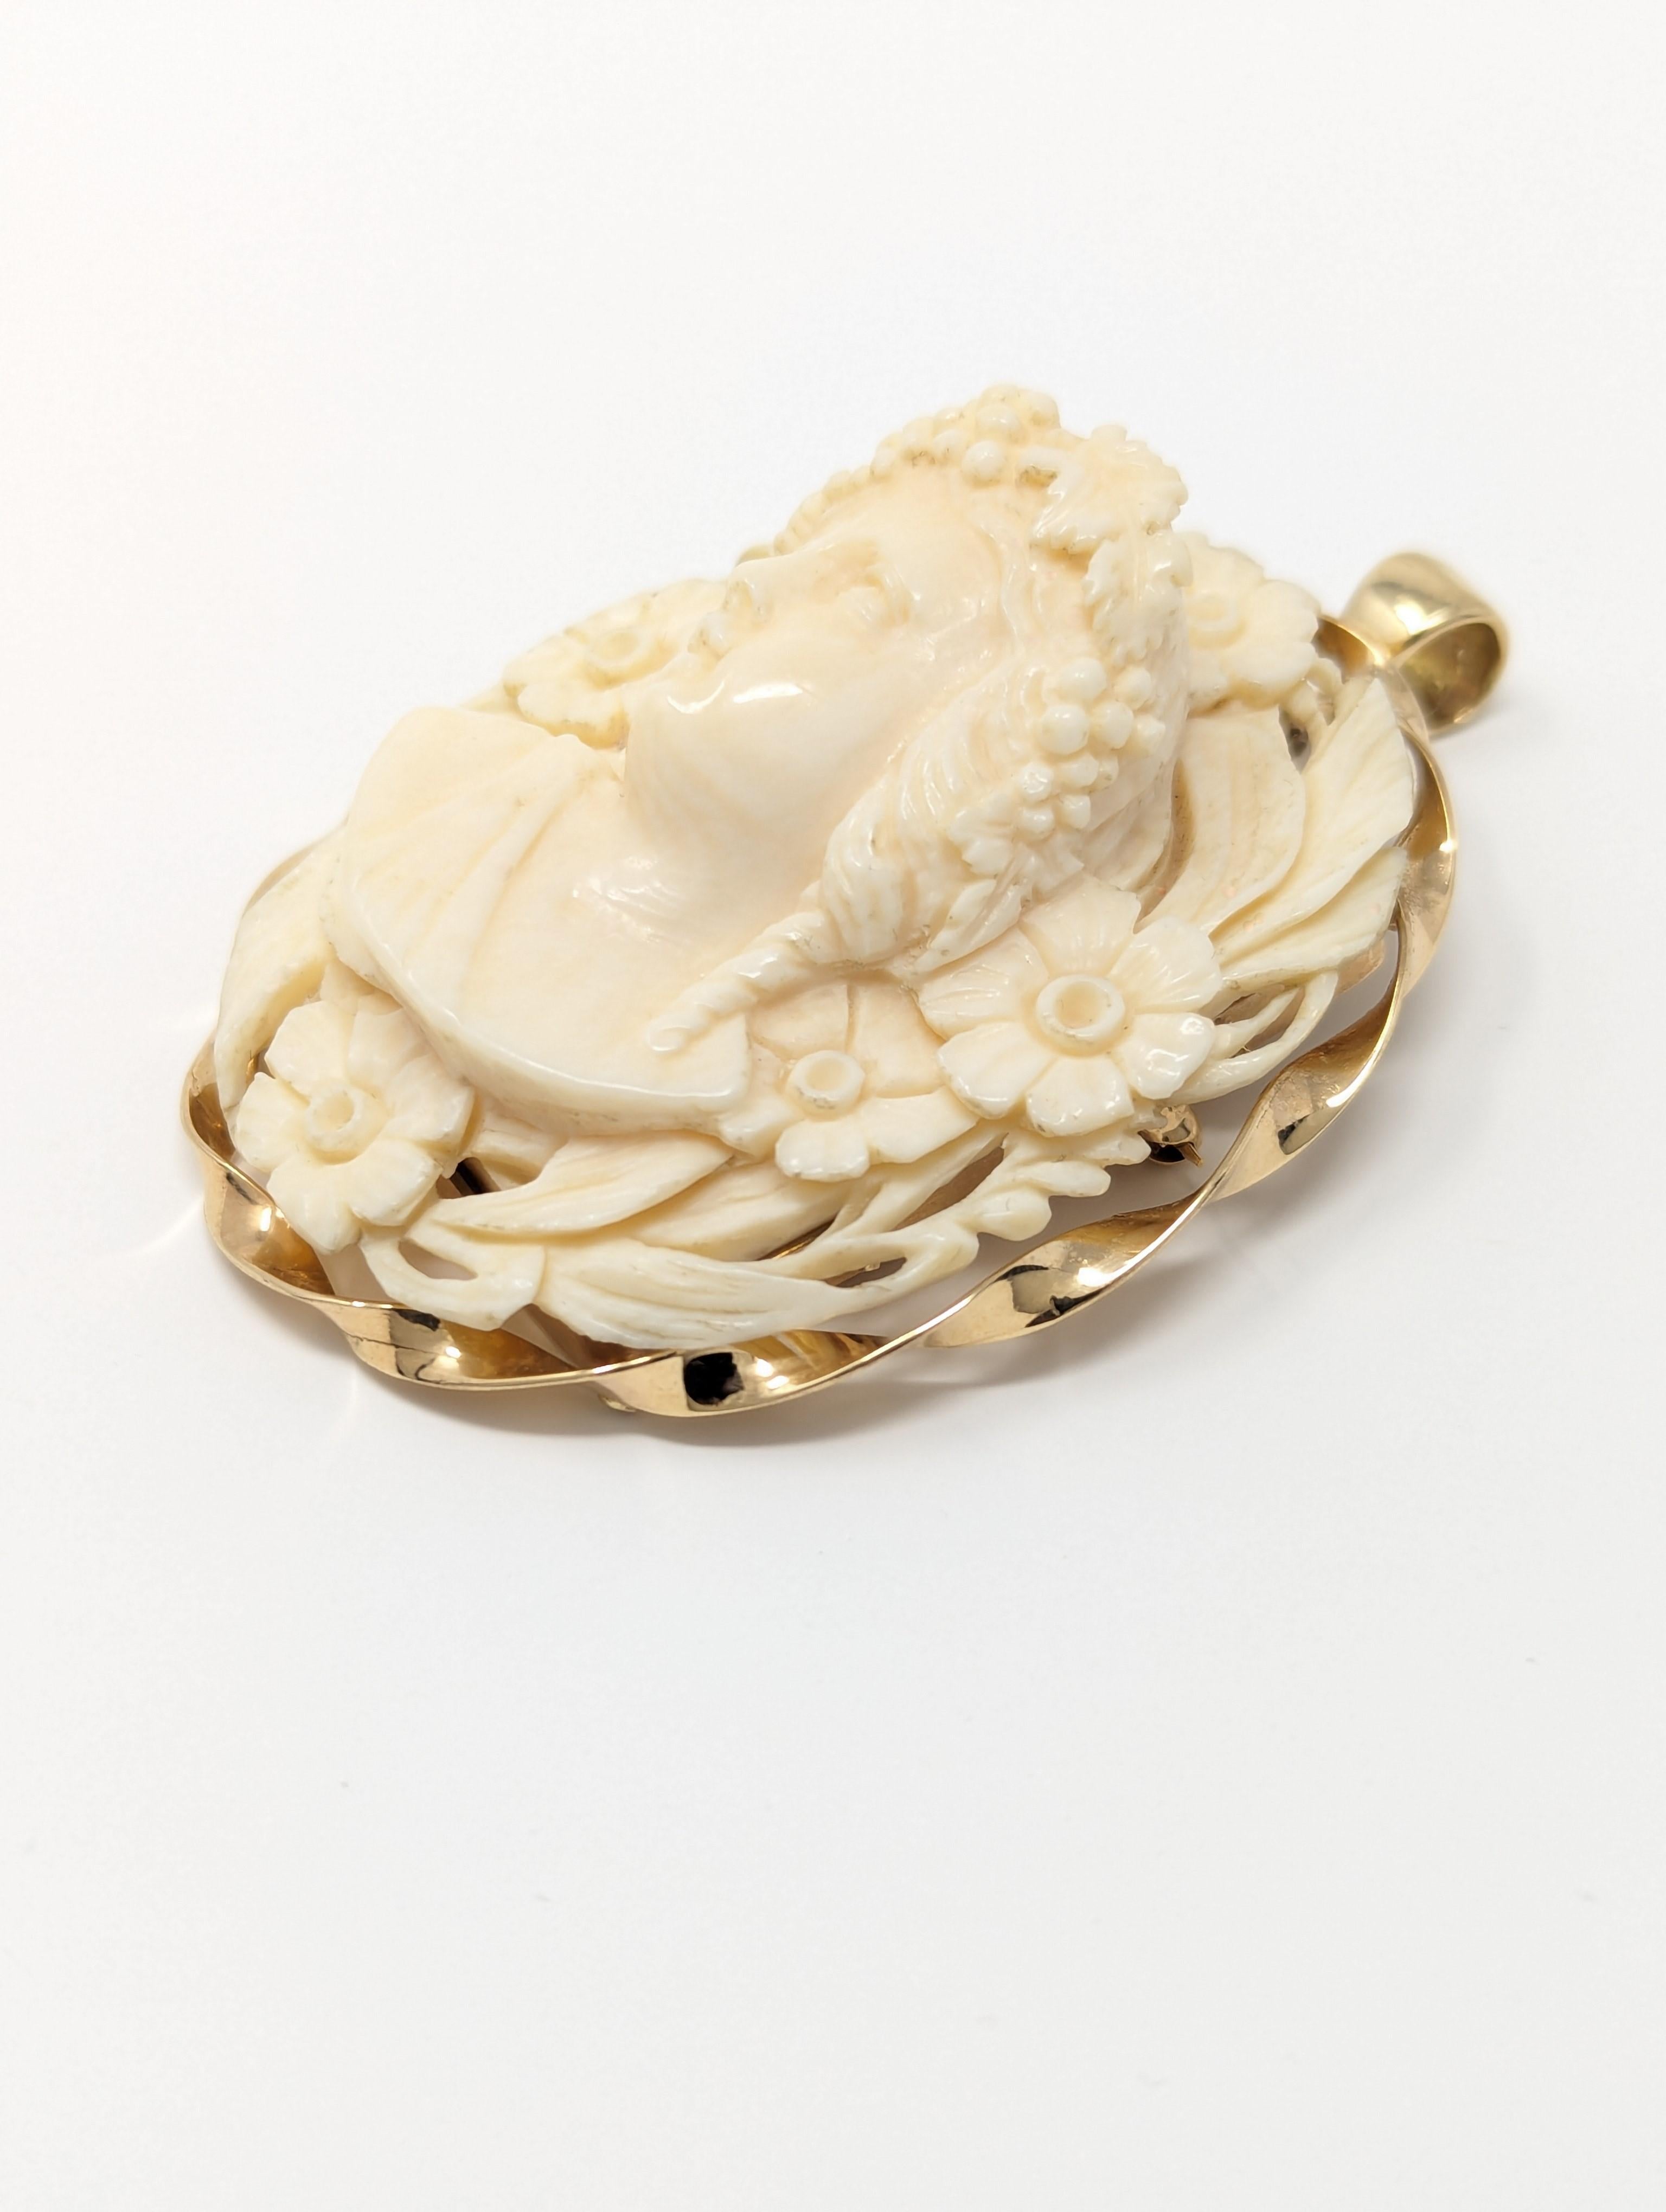 Antique 14k Hand Carved Bone Cameo Pendant Brooch High Relief Solid Yellow Gold In Fair Condition For Sale In Greer, SC